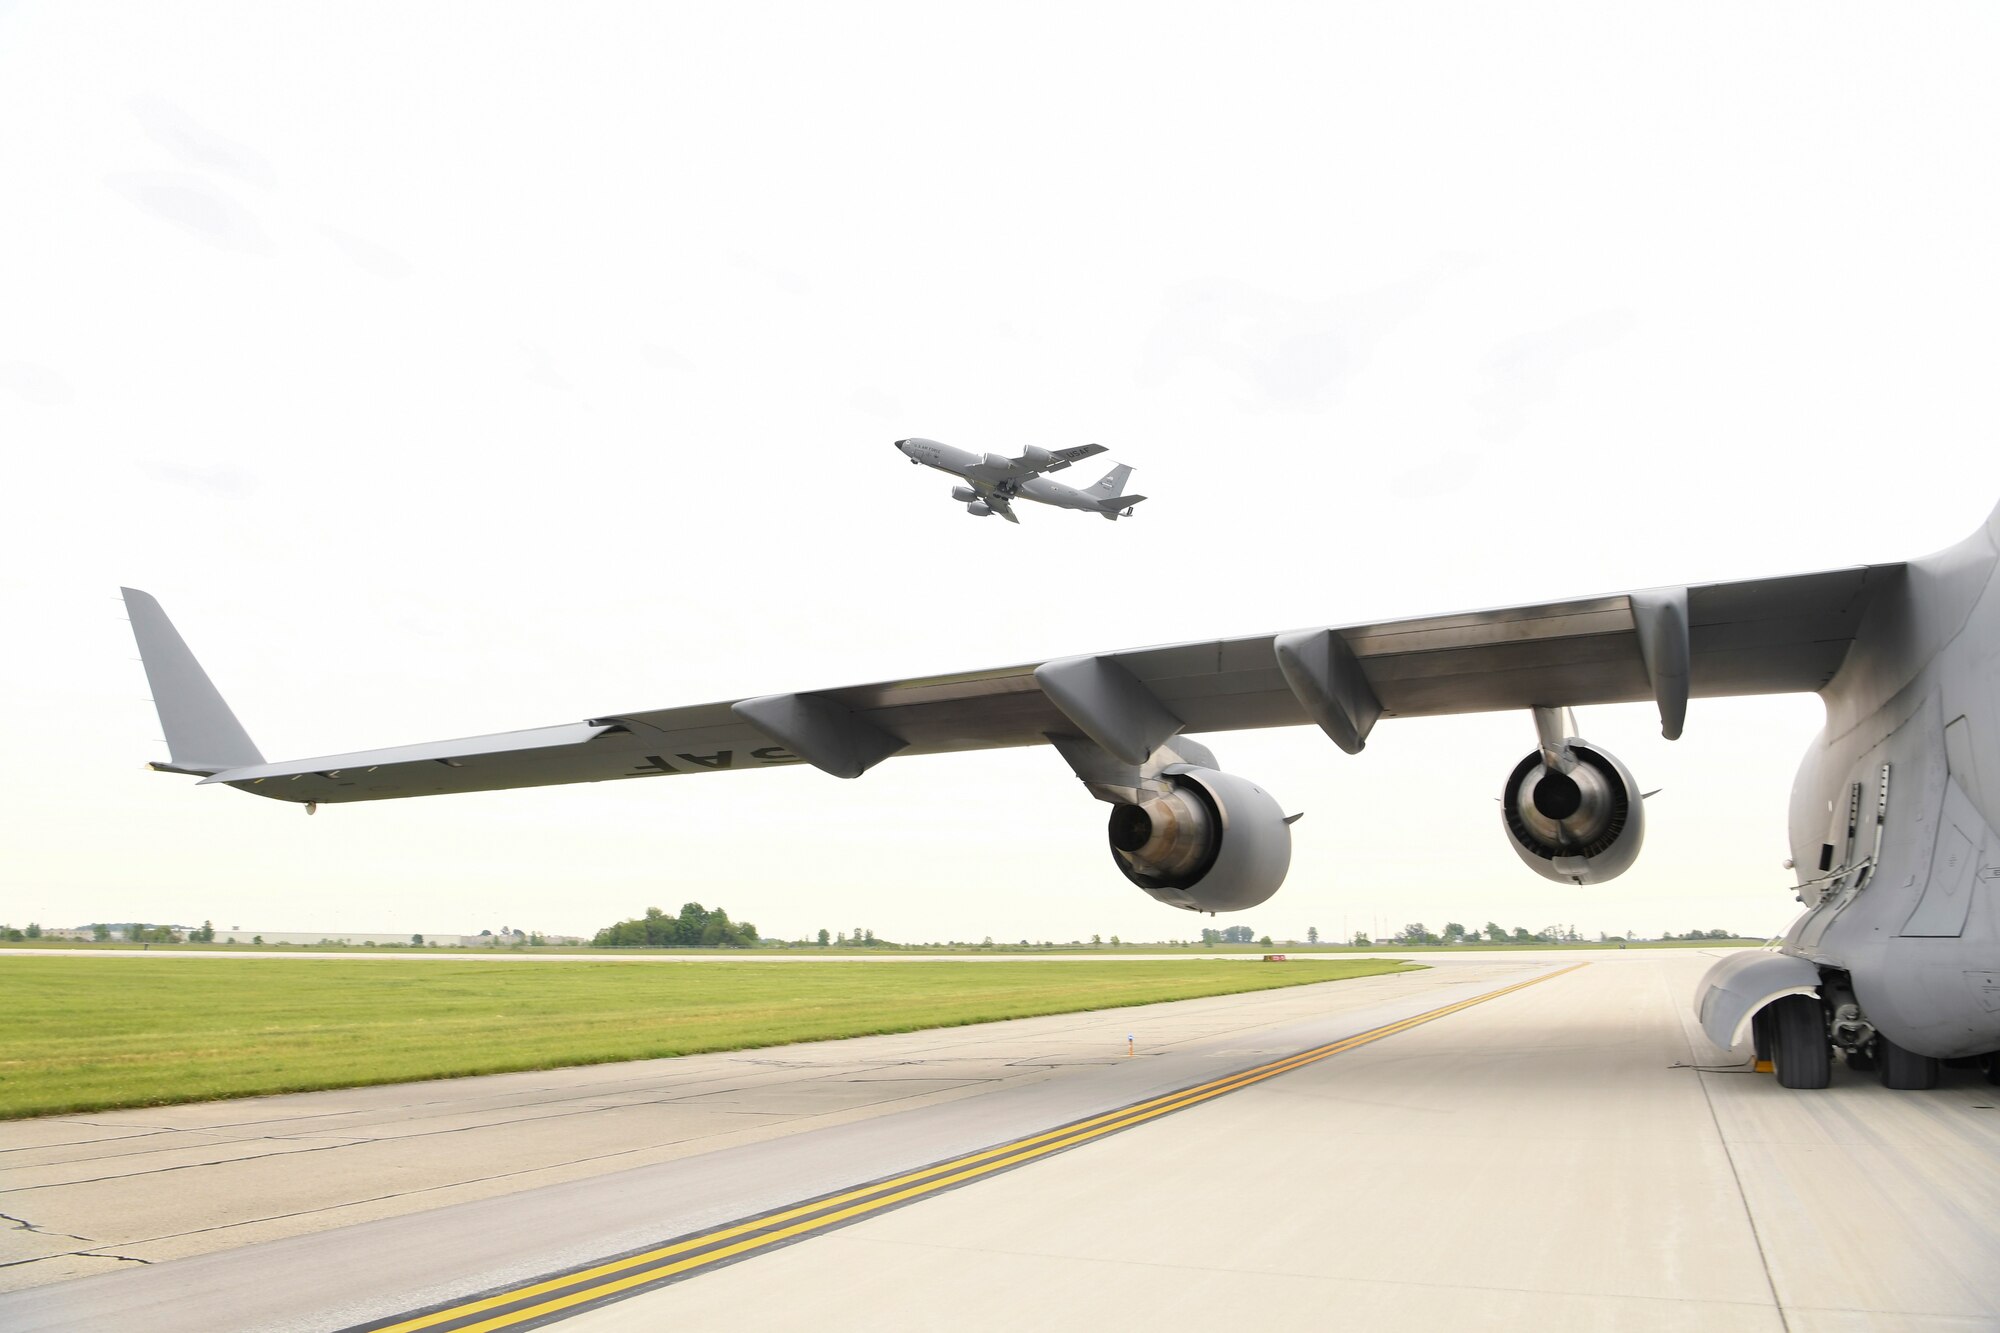 A Grissom KC-135R Stratotanker takes flight as a C-17 Globemaster II from the 512th Airlift Wing at Dover Air Force Base, Del., sits on the taxiway June 1, 2021. Members of Det. 1, 622nd Contingency Equipment Group, Dobbins Air Reserve Base, Ga., palletized and prepared the cargo for shipment to Hawaii to support a joint service exercise called Pacific Warriorz 2021.  (U.S. Air Force photo/Staff Sgt. Chris Massey)